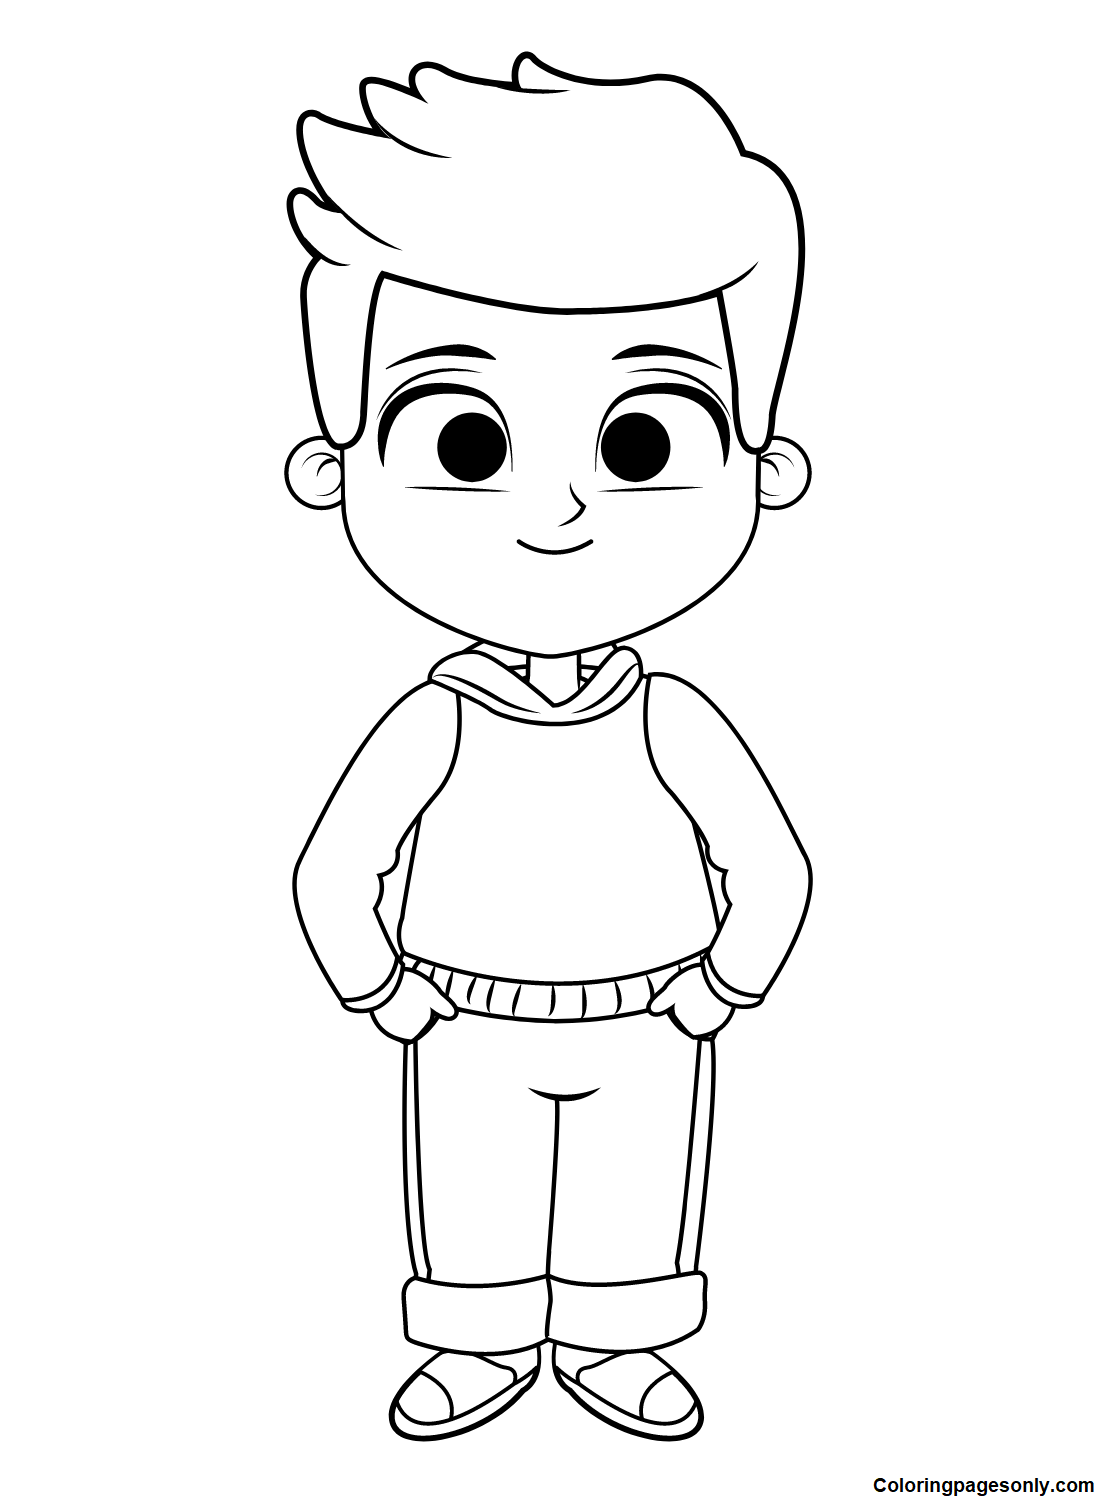 Boyish Face Coloring Pages